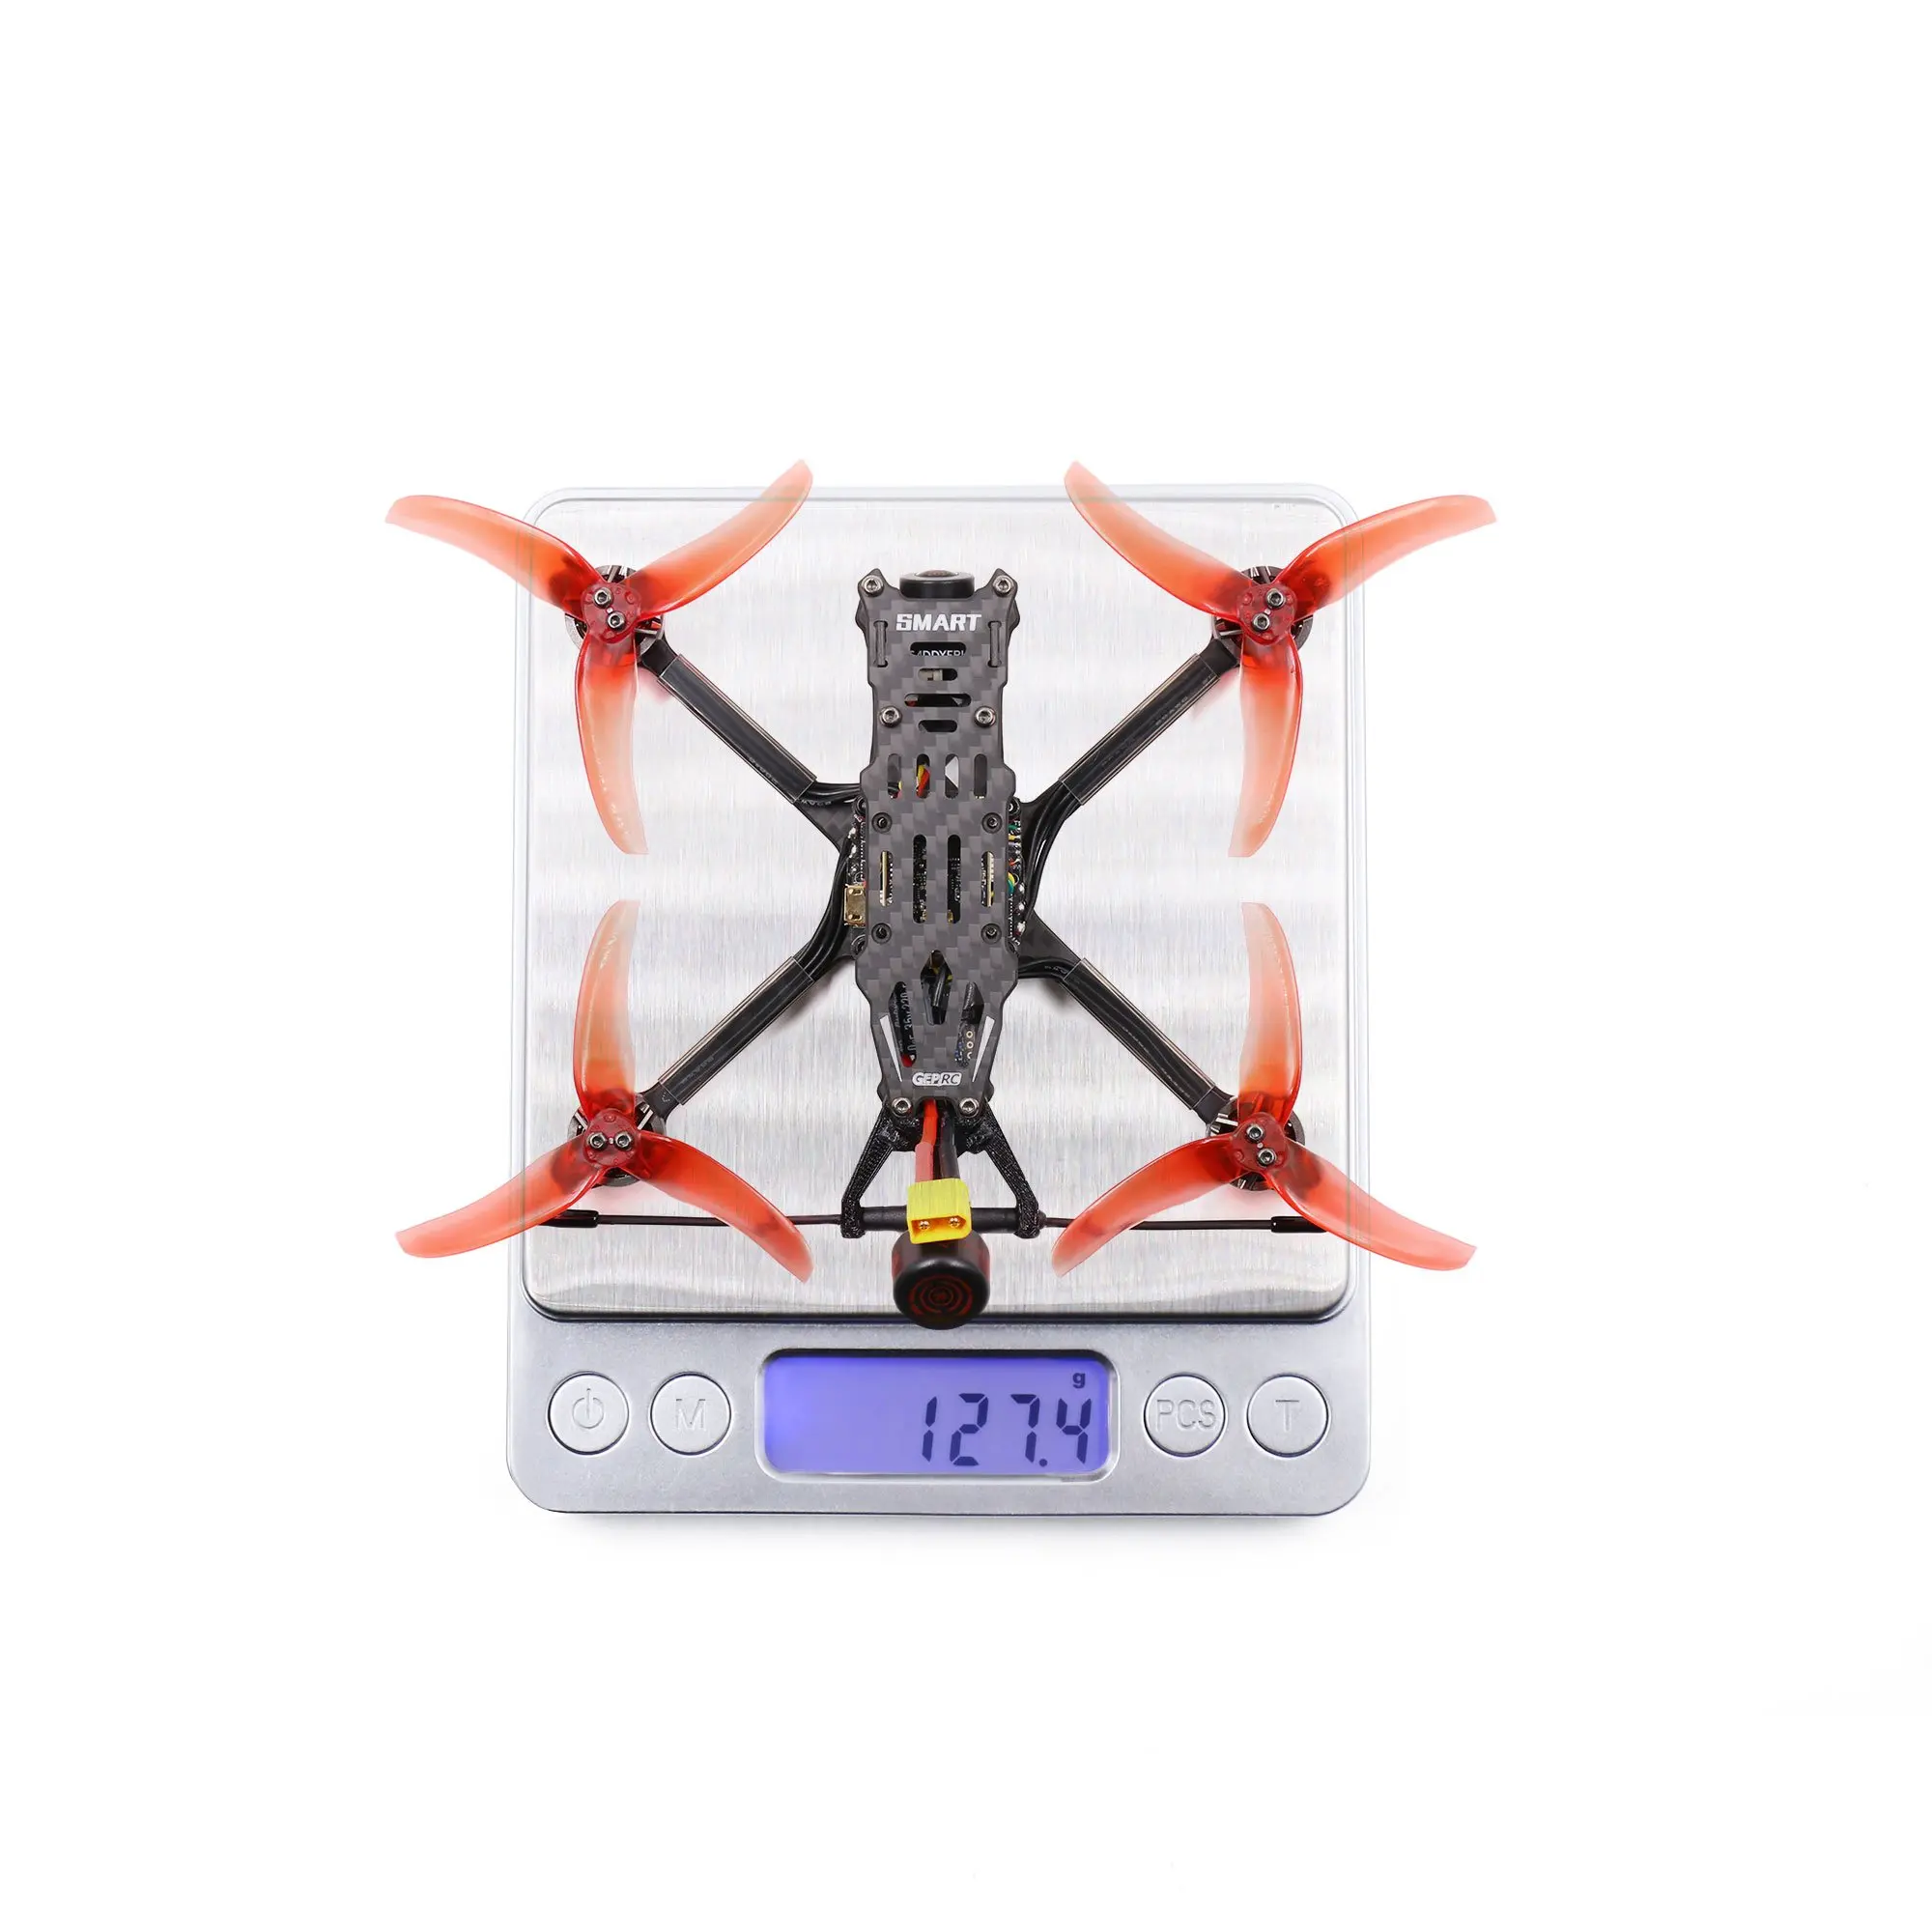 GEPRC SMART 35 FPV Drone, if equipped with a 1100mAh battery, the flight time is 13 minutes .